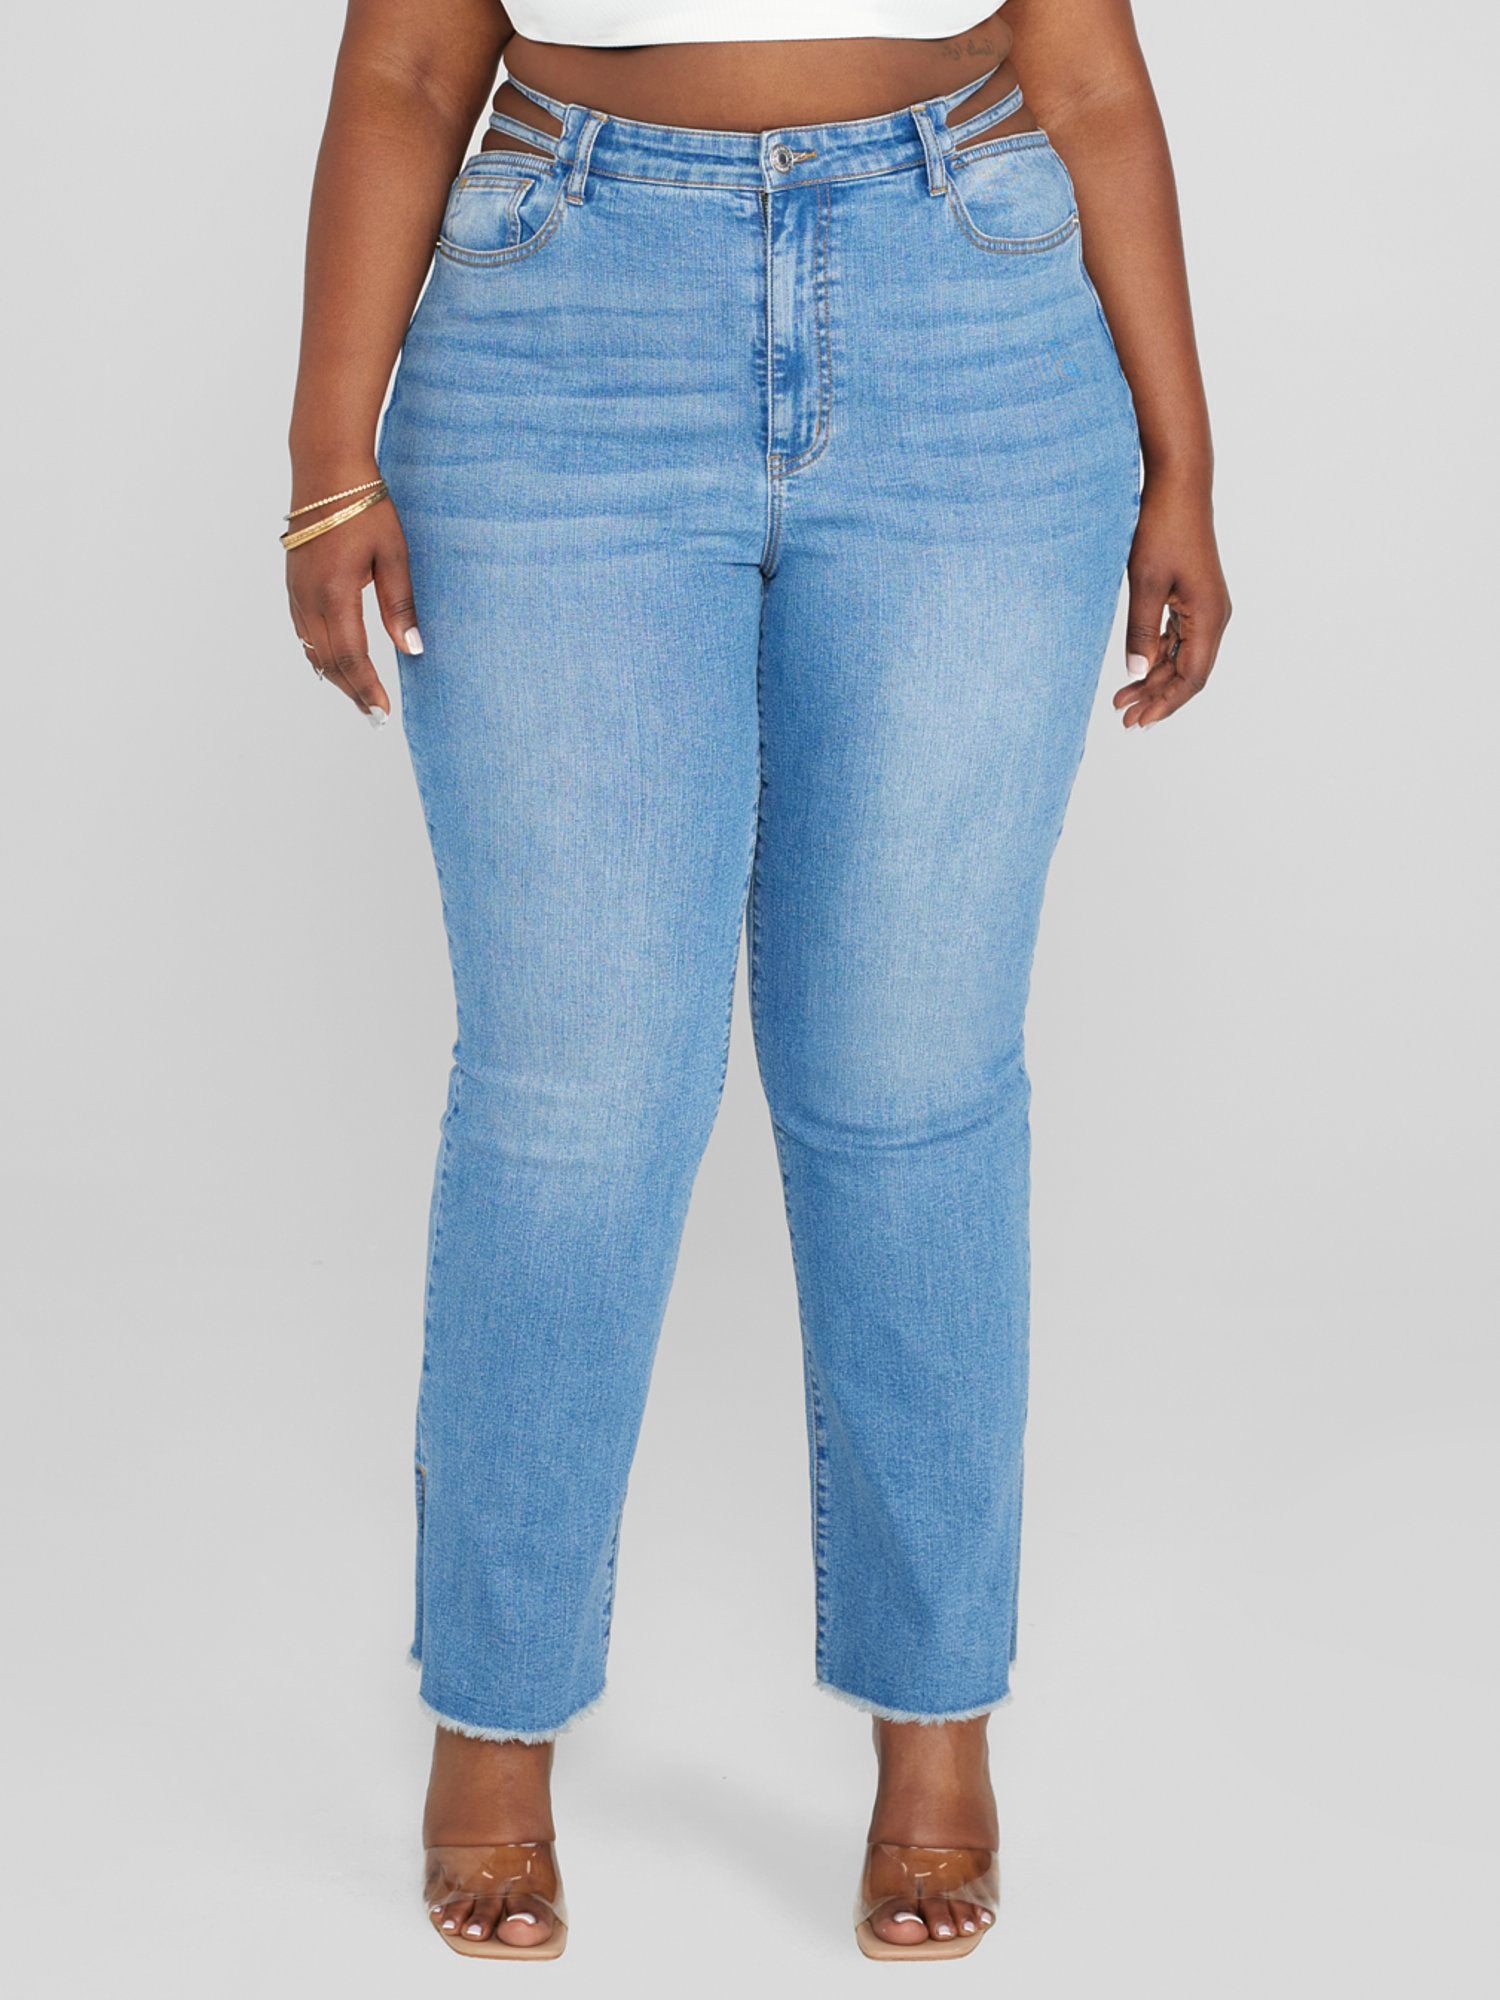 Plus Size High Rise Split Waist Relaxed Fit Jeans - Tall inseam